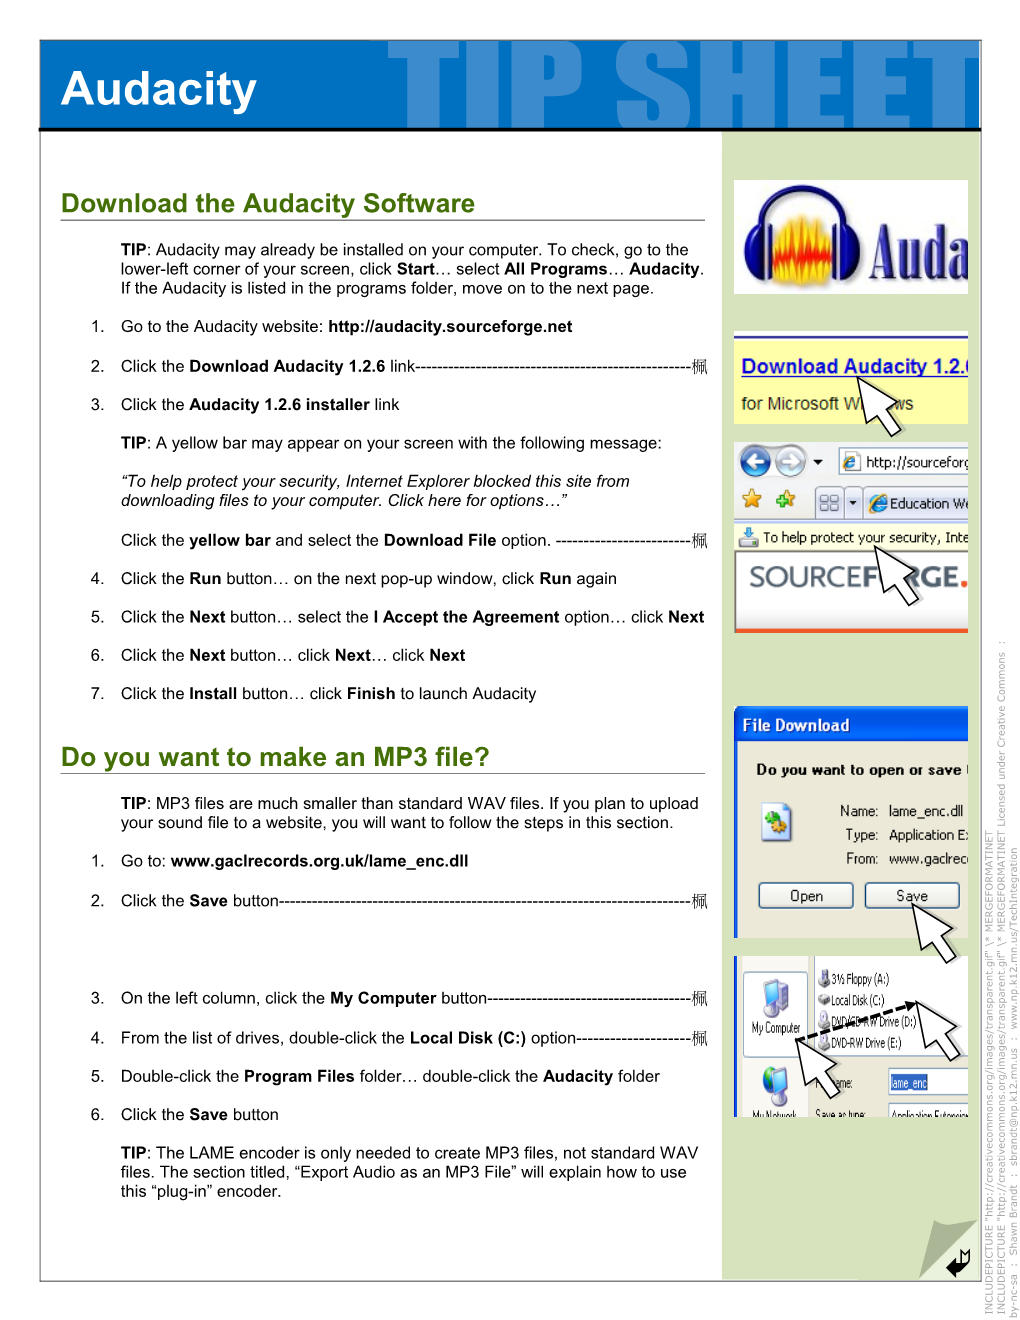 Download the Audacity Software